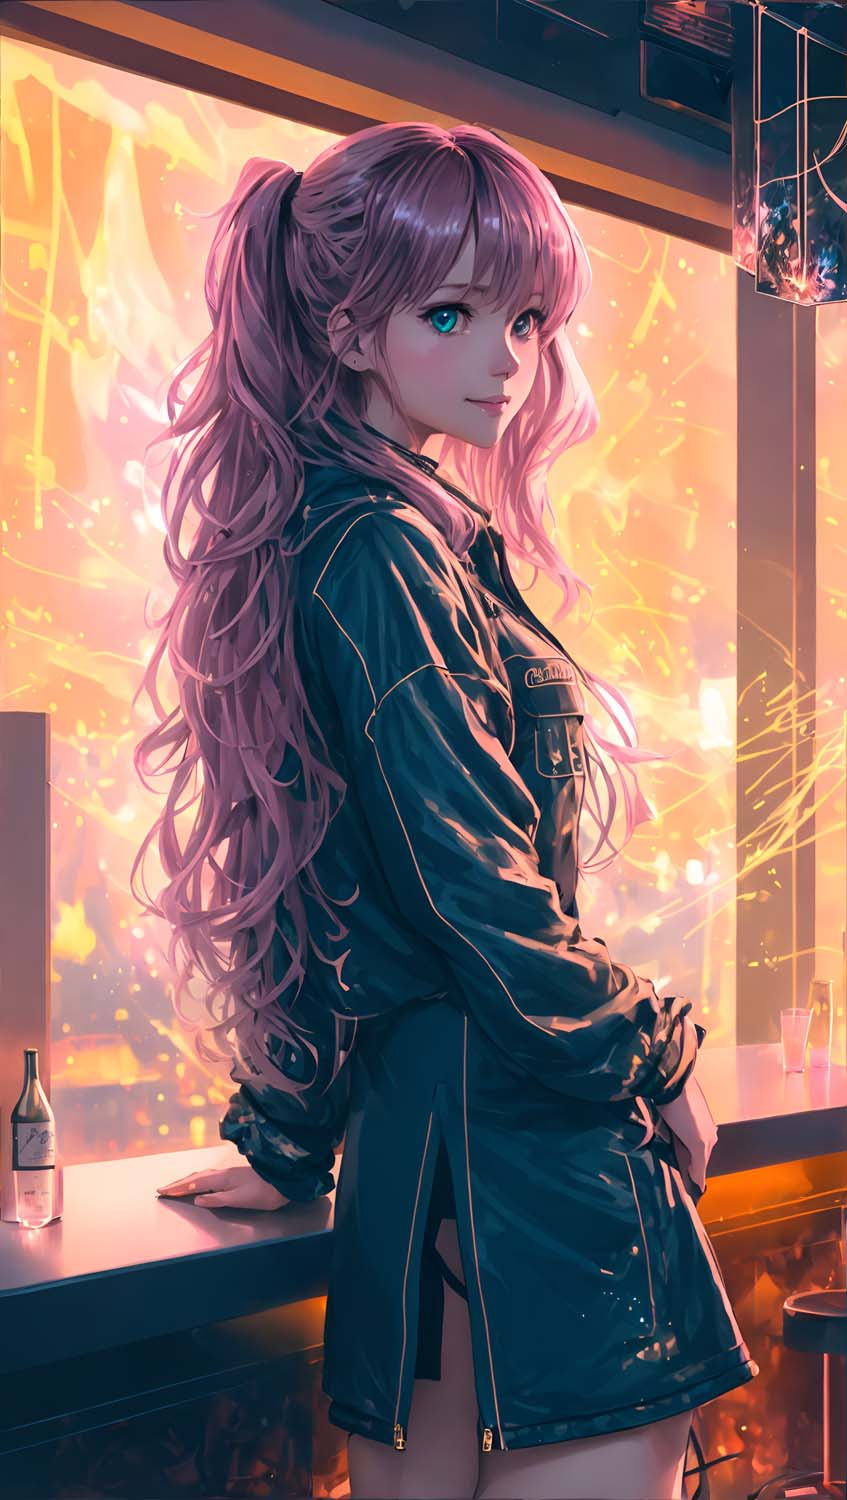 Top 25 Best Anime iPhone Wallpapers  GettyWallpapers